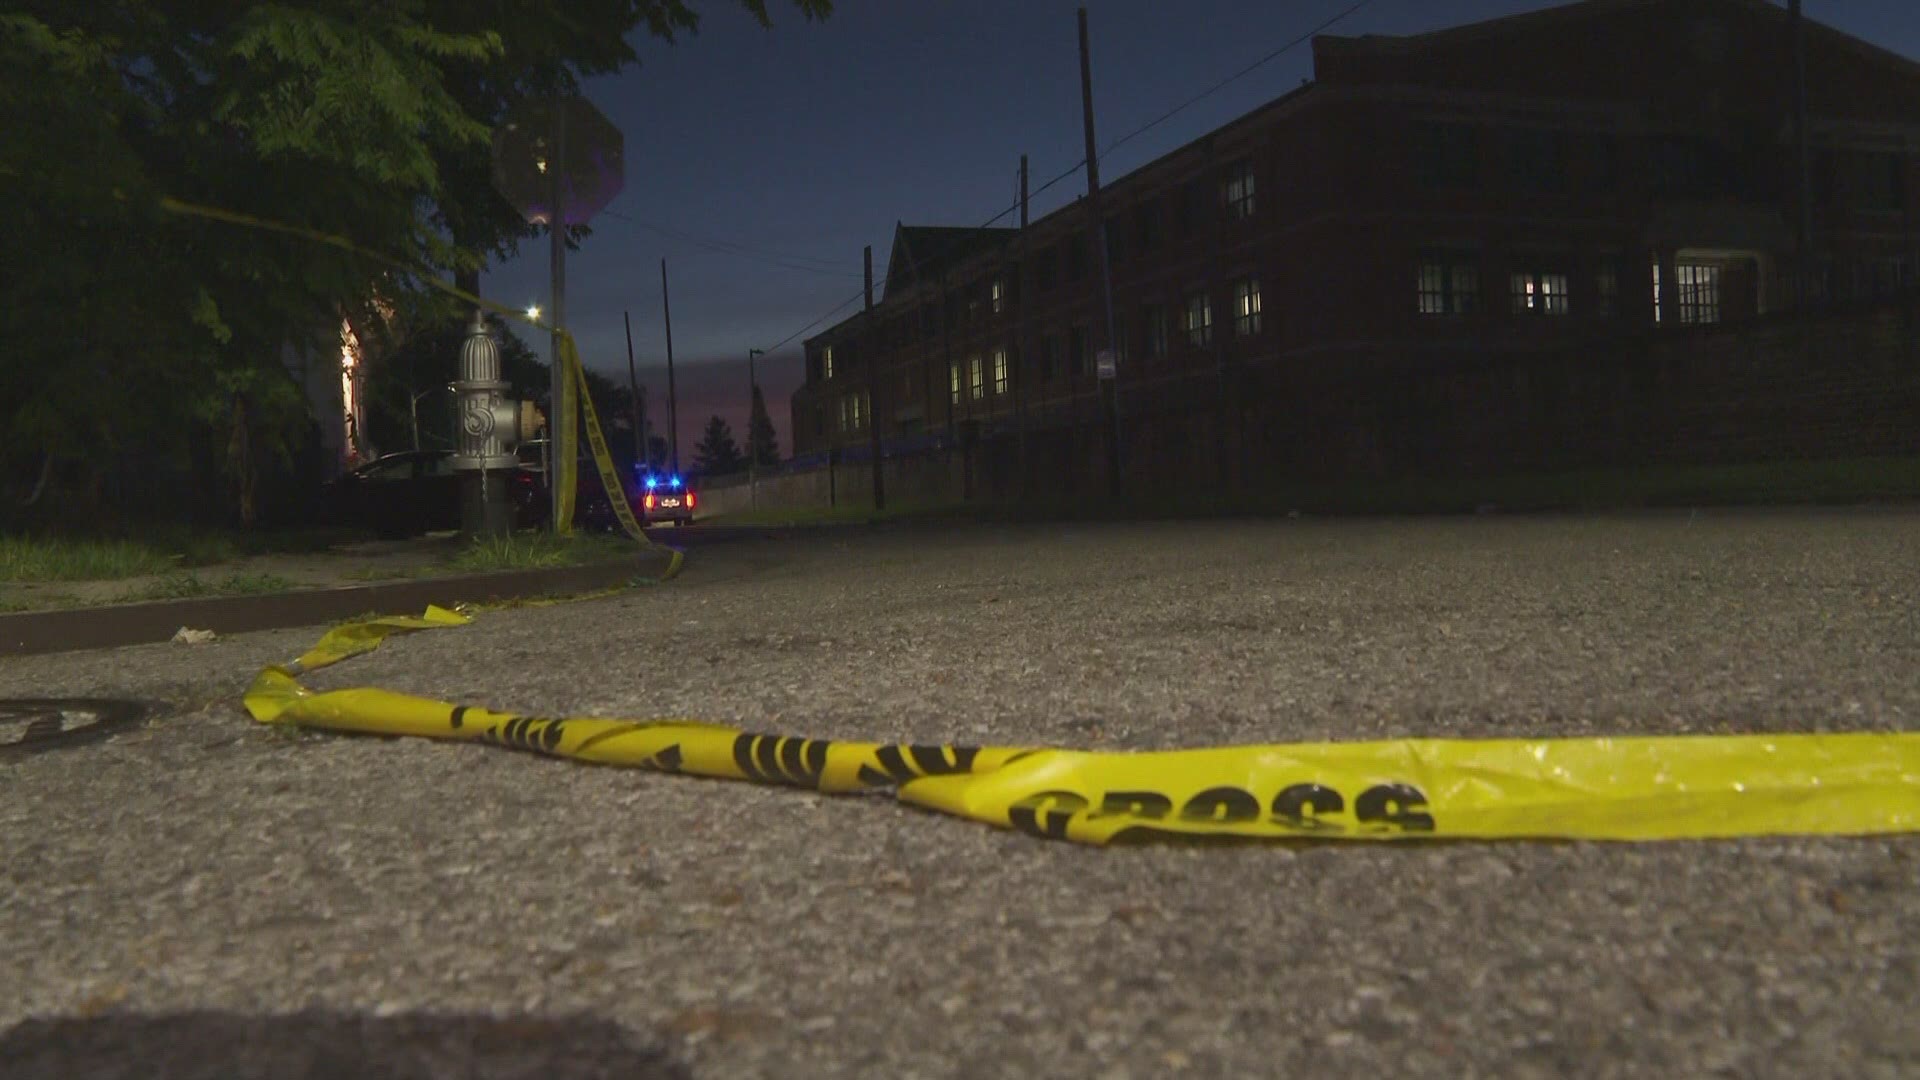 The young girl died in the shooting in the 500 block of Delery Street.